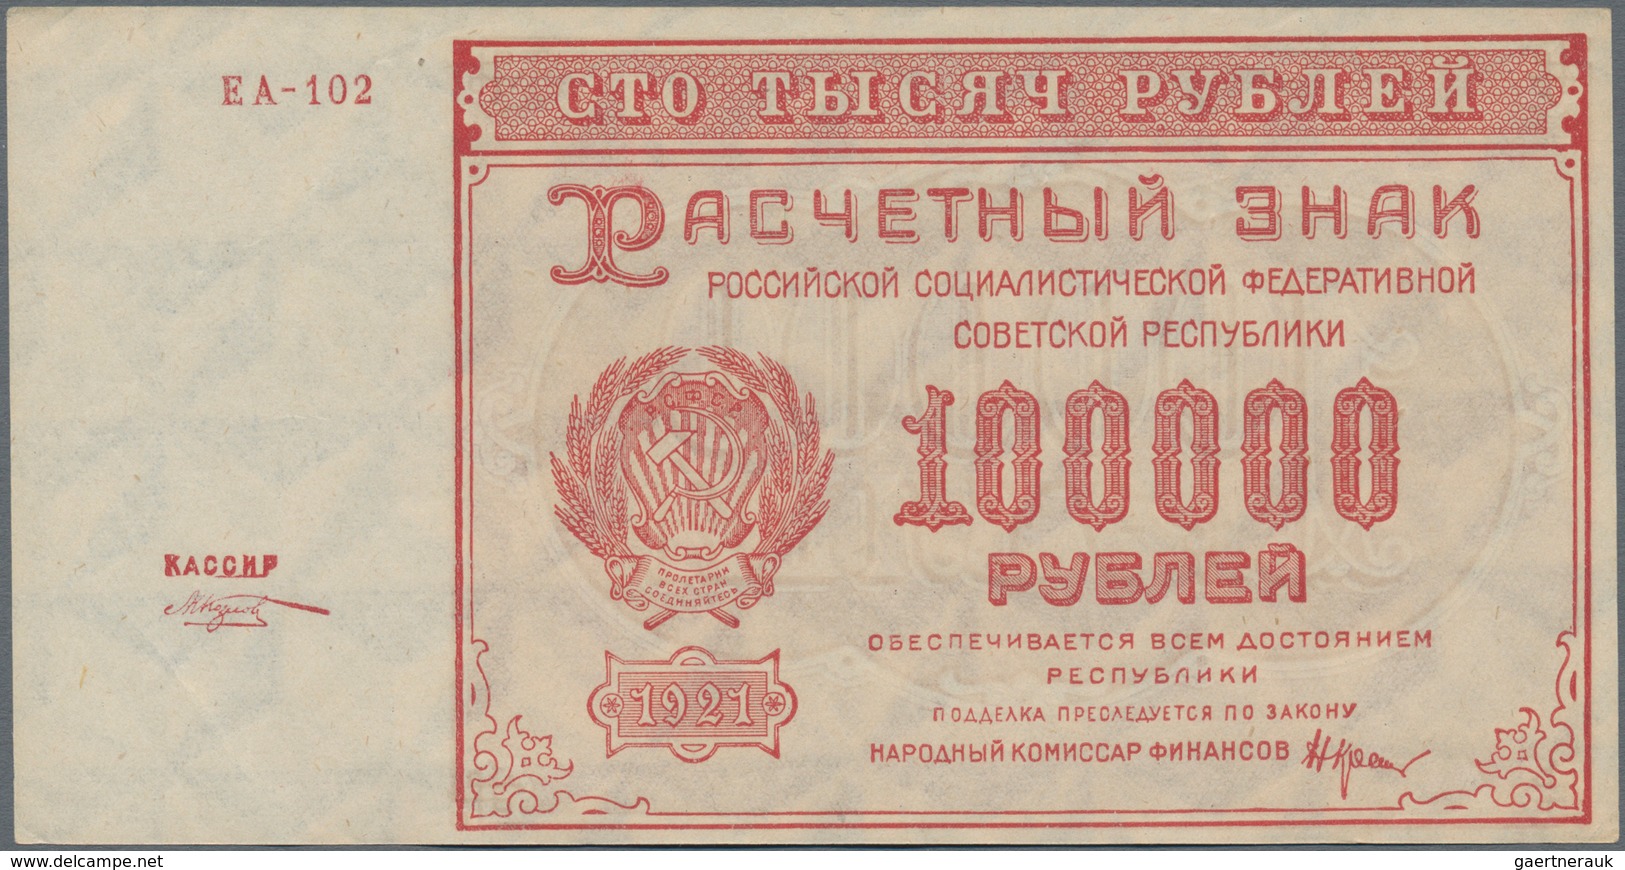 Russia / Russland: Set with 10 banknotes 100.000 Rubles 1921 State Treasury, P.117 in about VF to VF